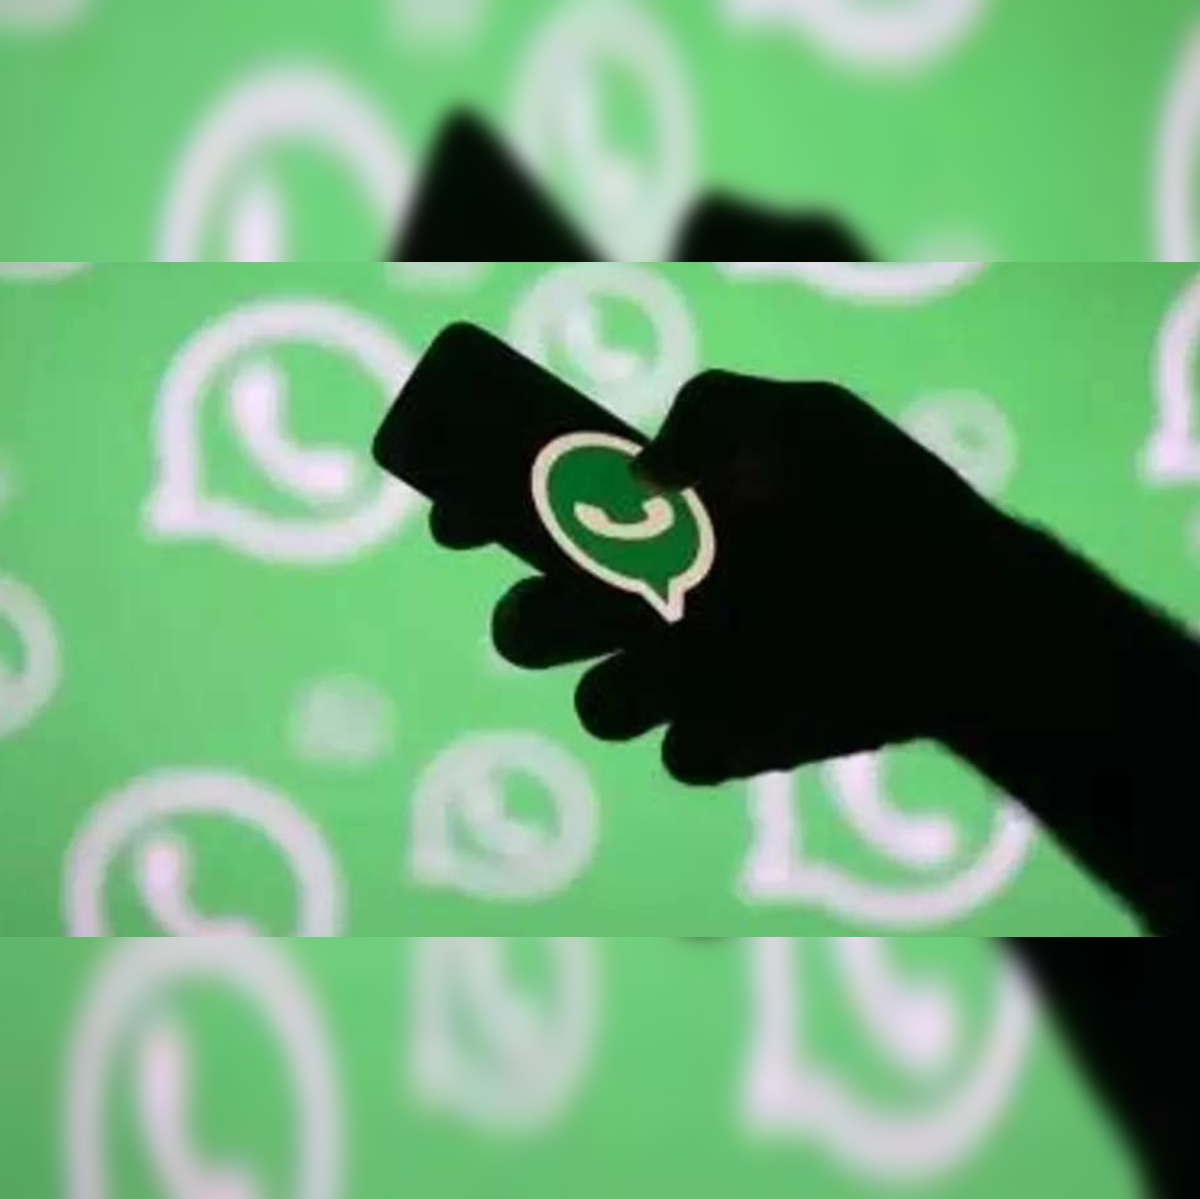 A WhatsApp account hijacking shows why phone numbers are not good